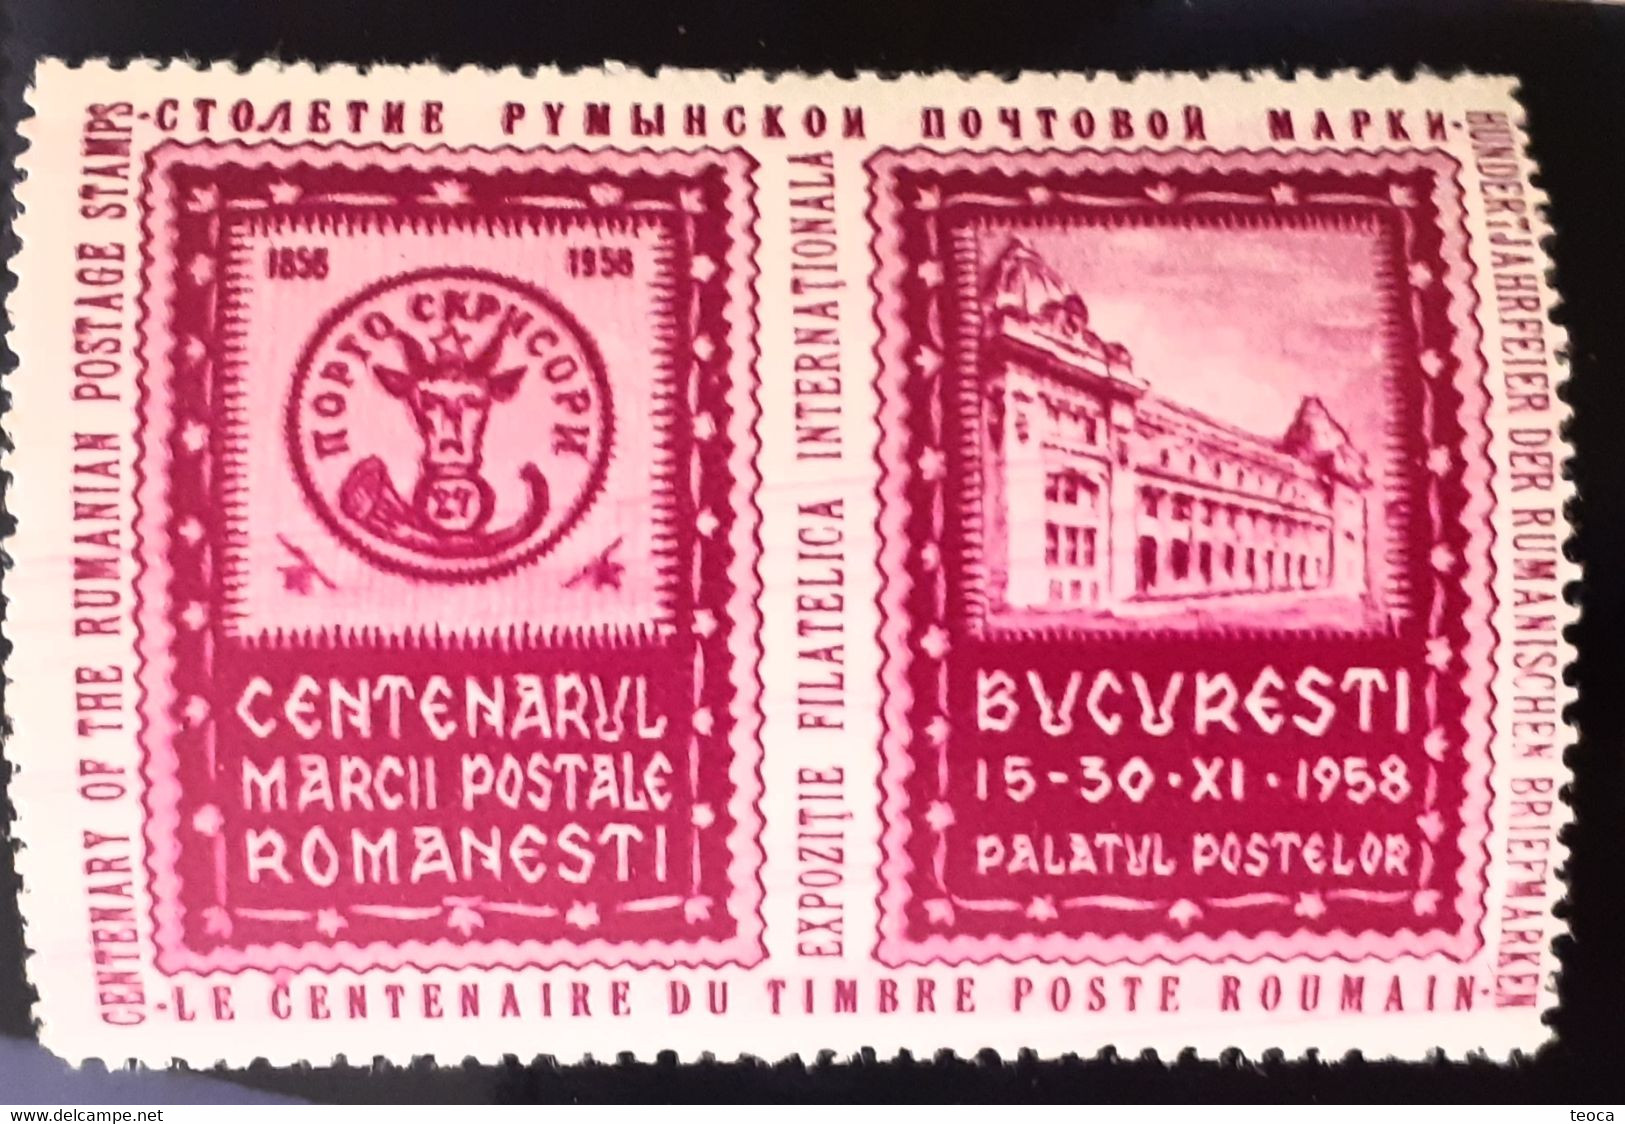 Stamps  Errors Romania 1958 Printed With Lines Vertical, Bull Head, Palace Post, Mnh - Errors, Freaks & Oddities (EFO)